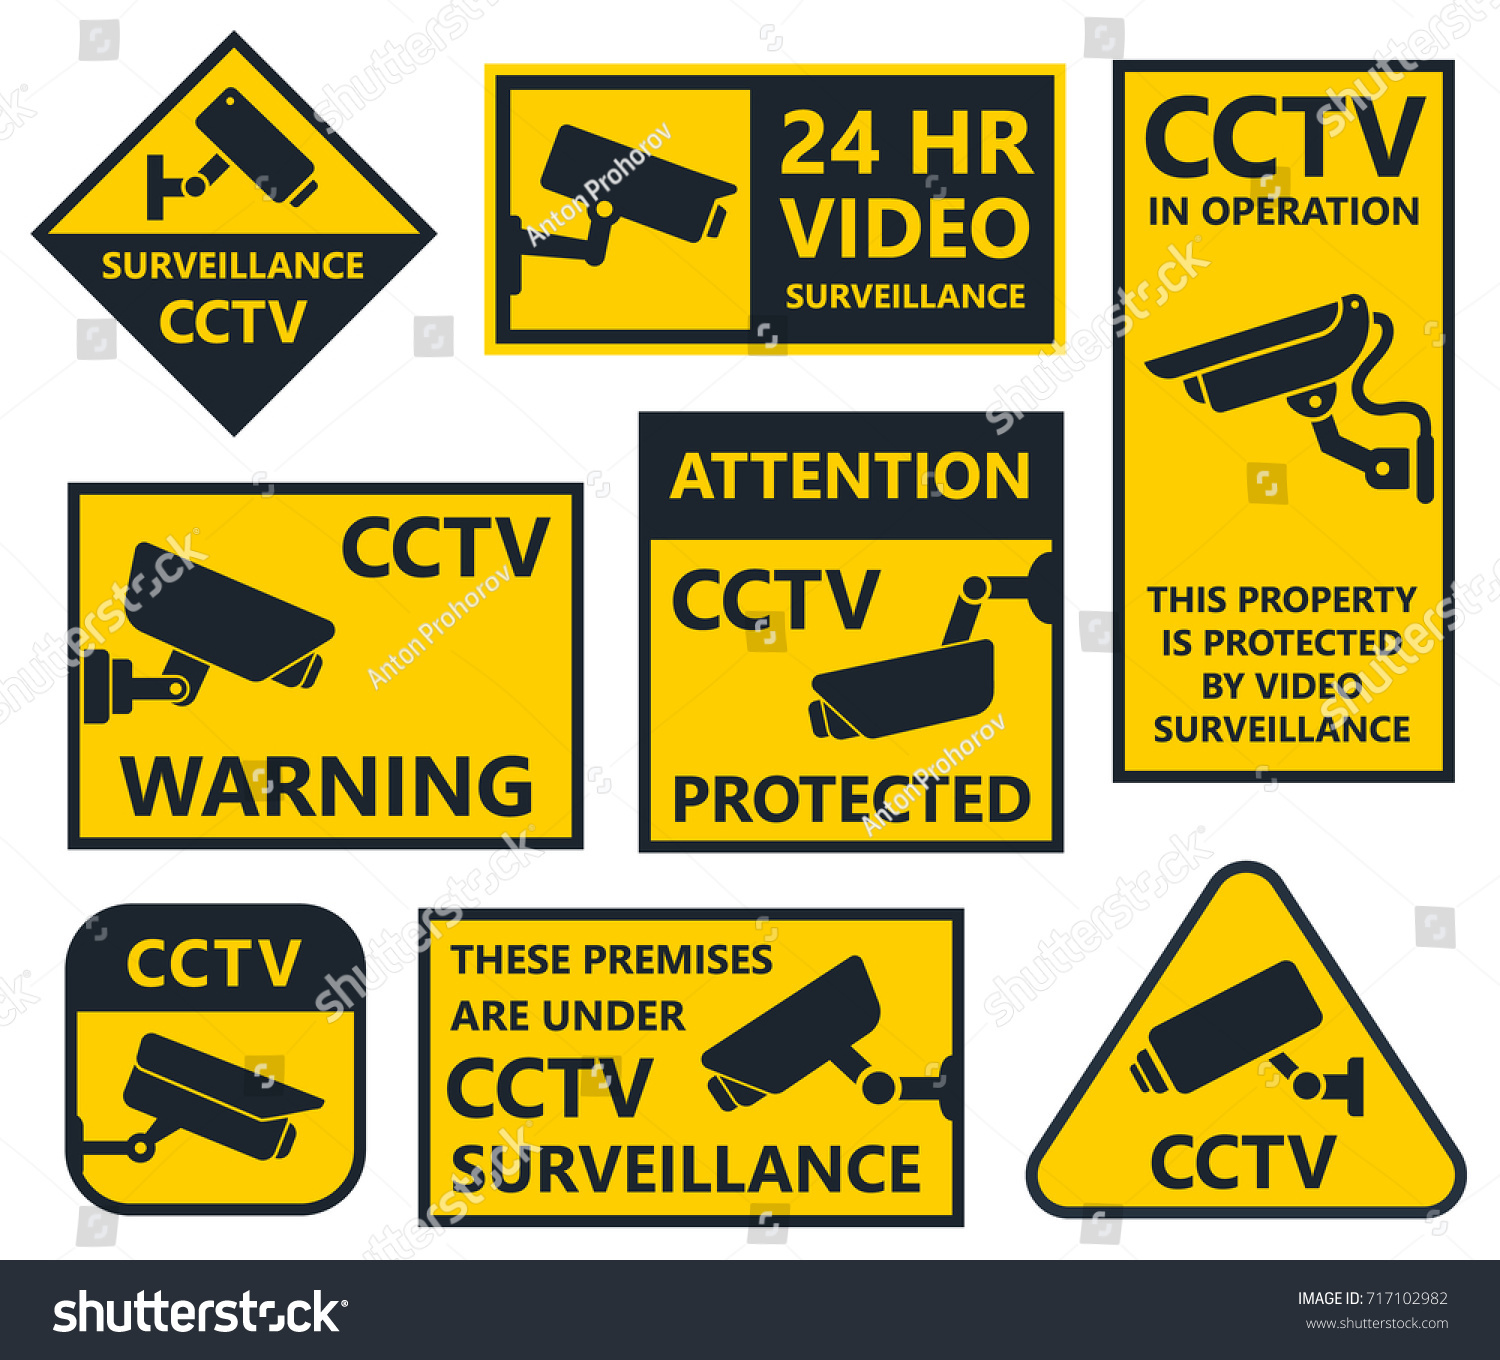 CCTV in operation safety camera sticker 20cmx15cm video recording decal 